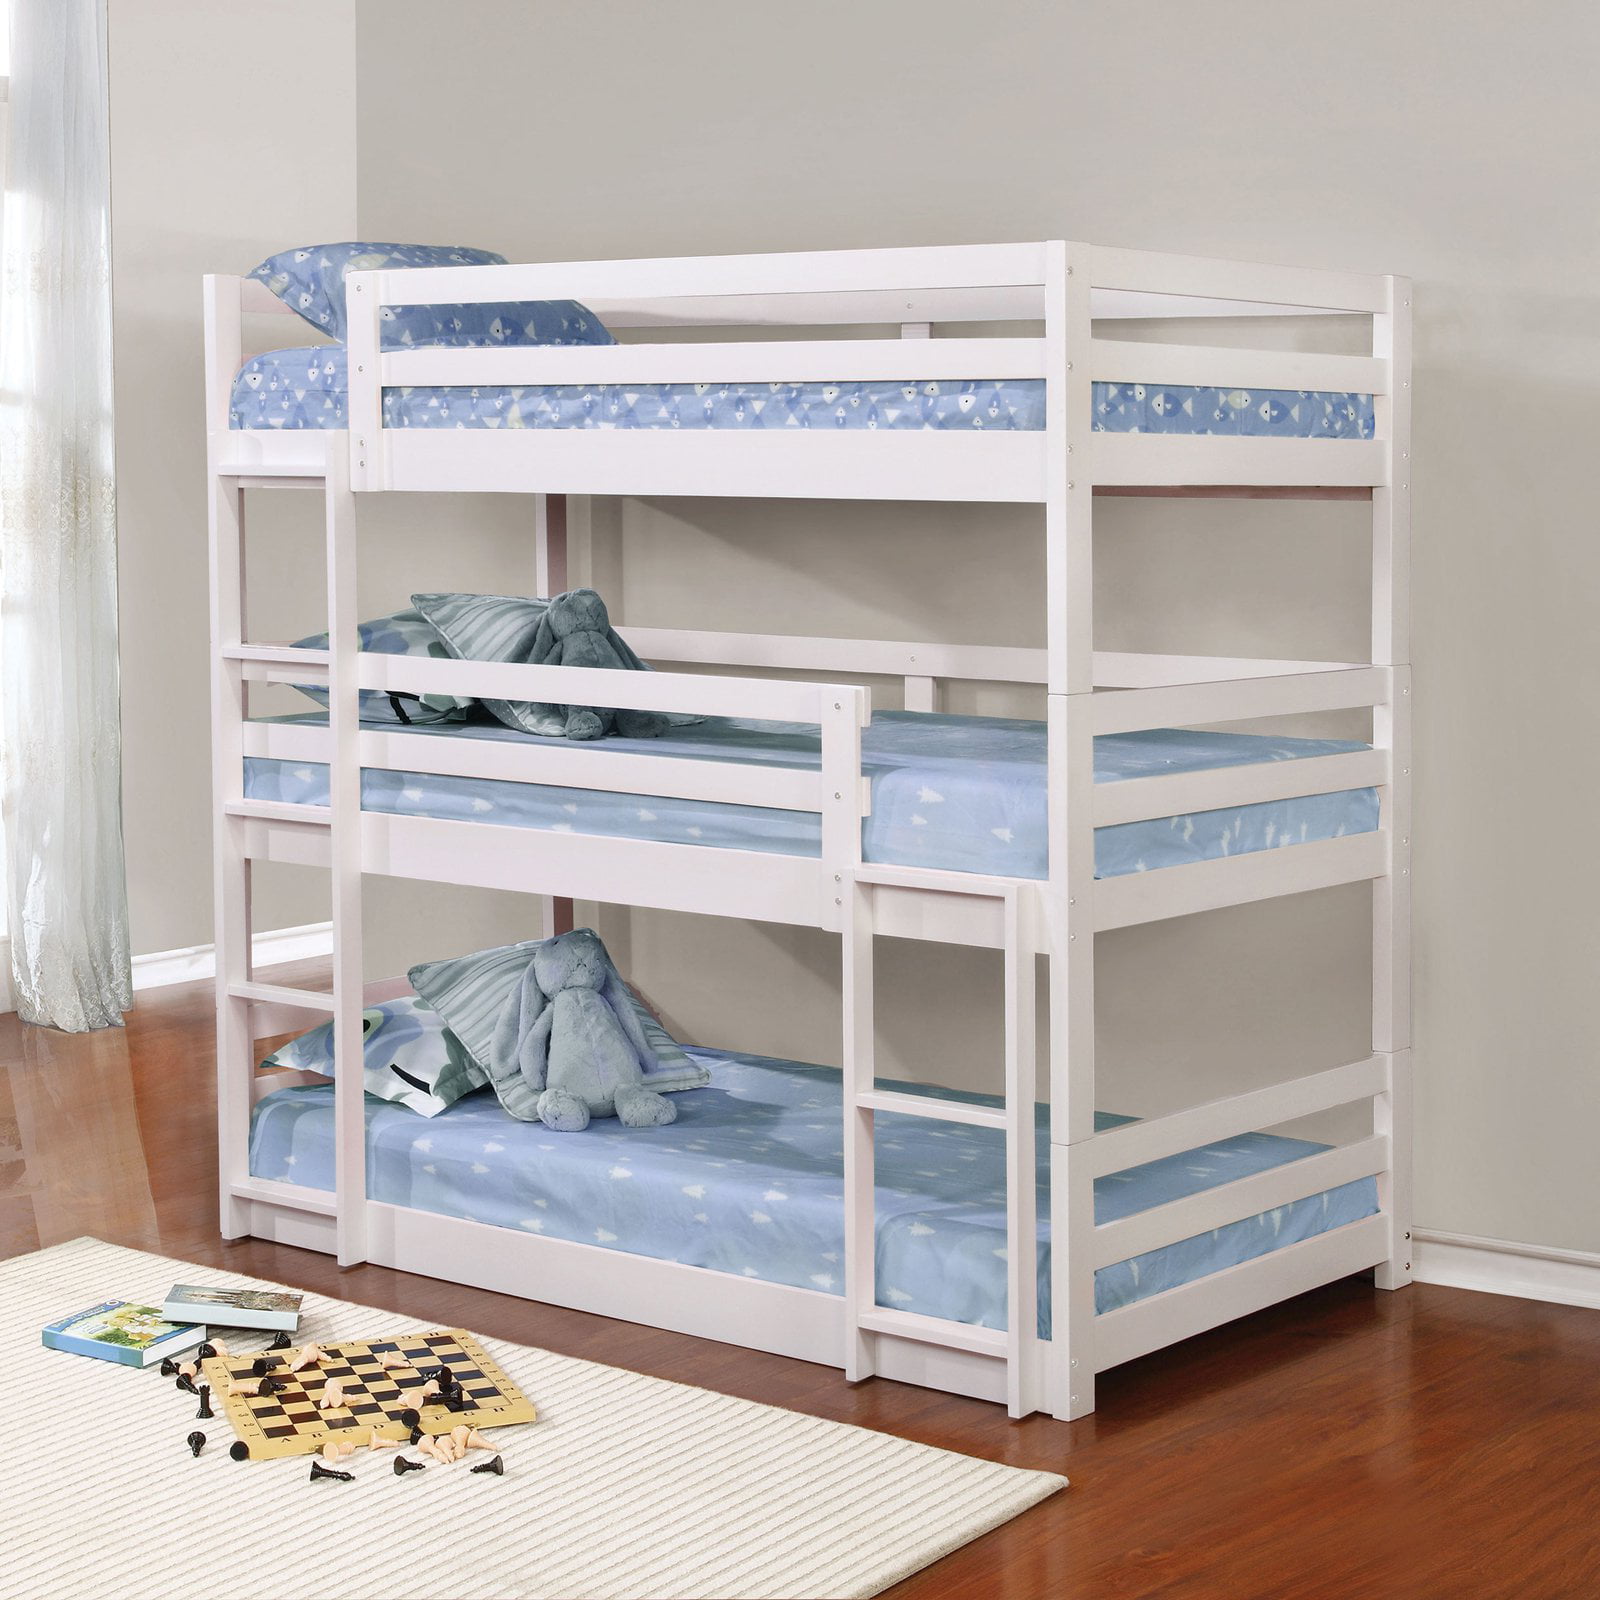 Coaster Furniture Triple Layer Bunk Bed, Three Tier Bunk Bed Plans